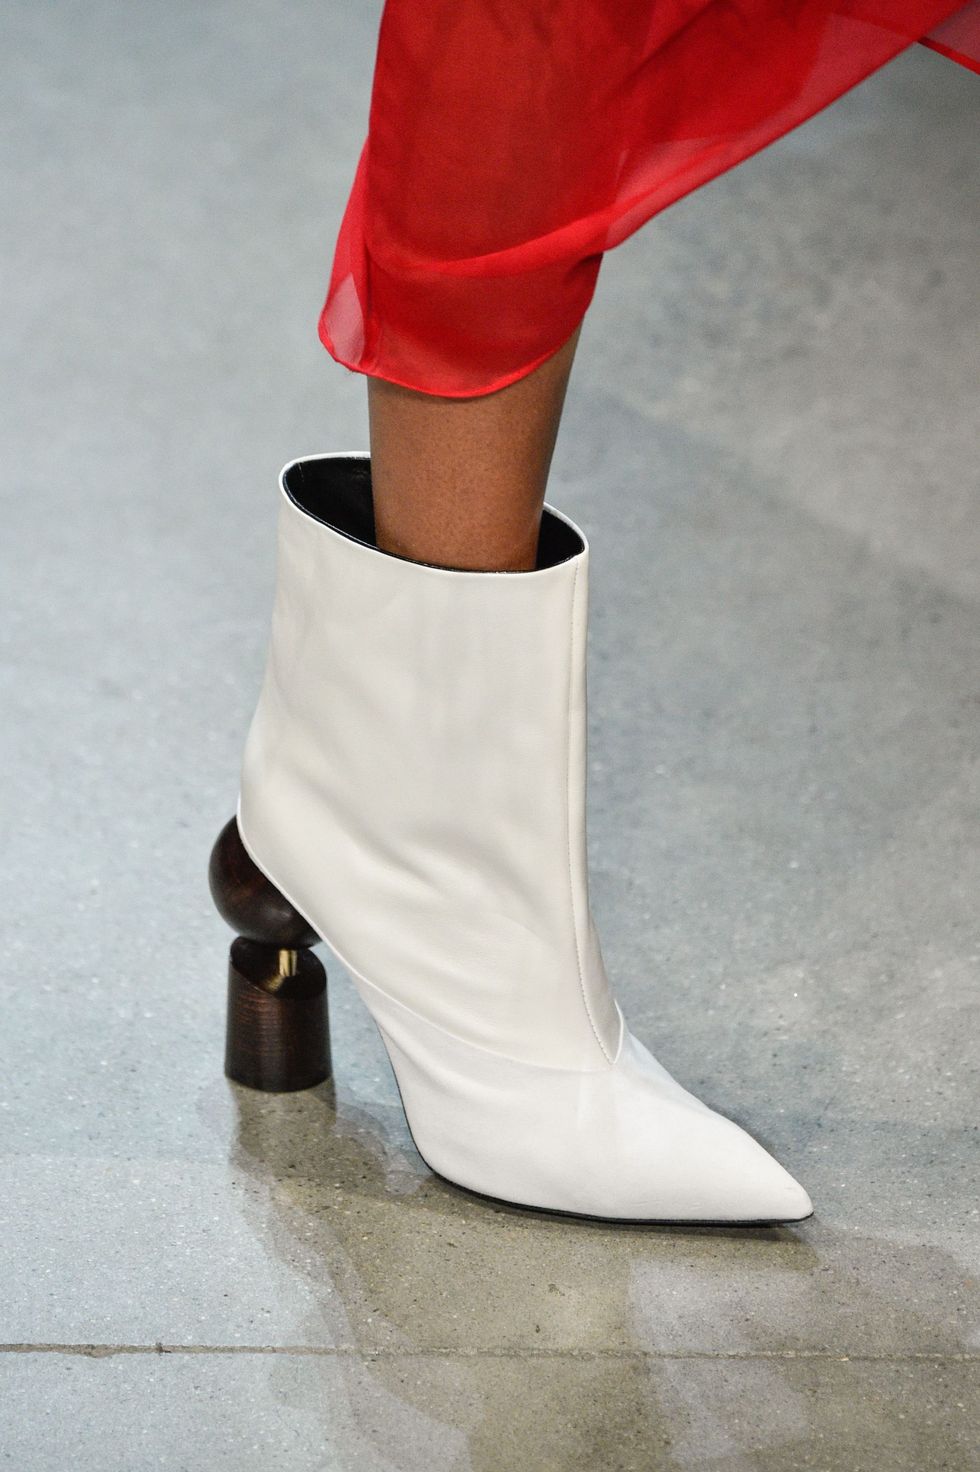 Footwear, White, Shoe, Red, Fashion, Boot, High heels, Ankle, Leg, Joint, 